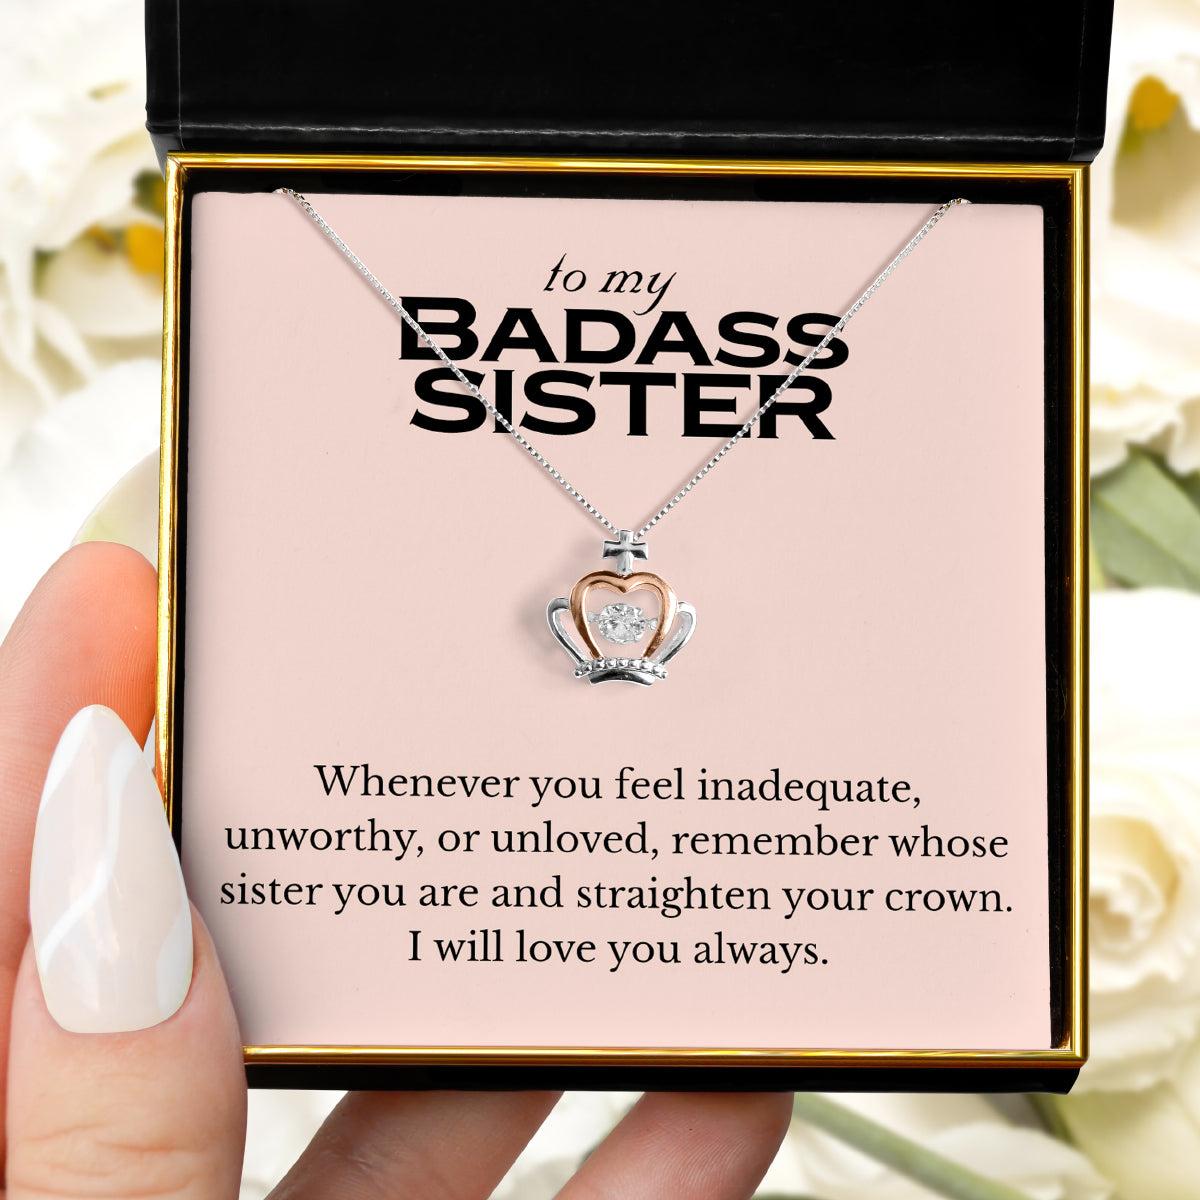 To My Badass Sister (Pink Edition) - Luxe Crown Necklace Gift Set